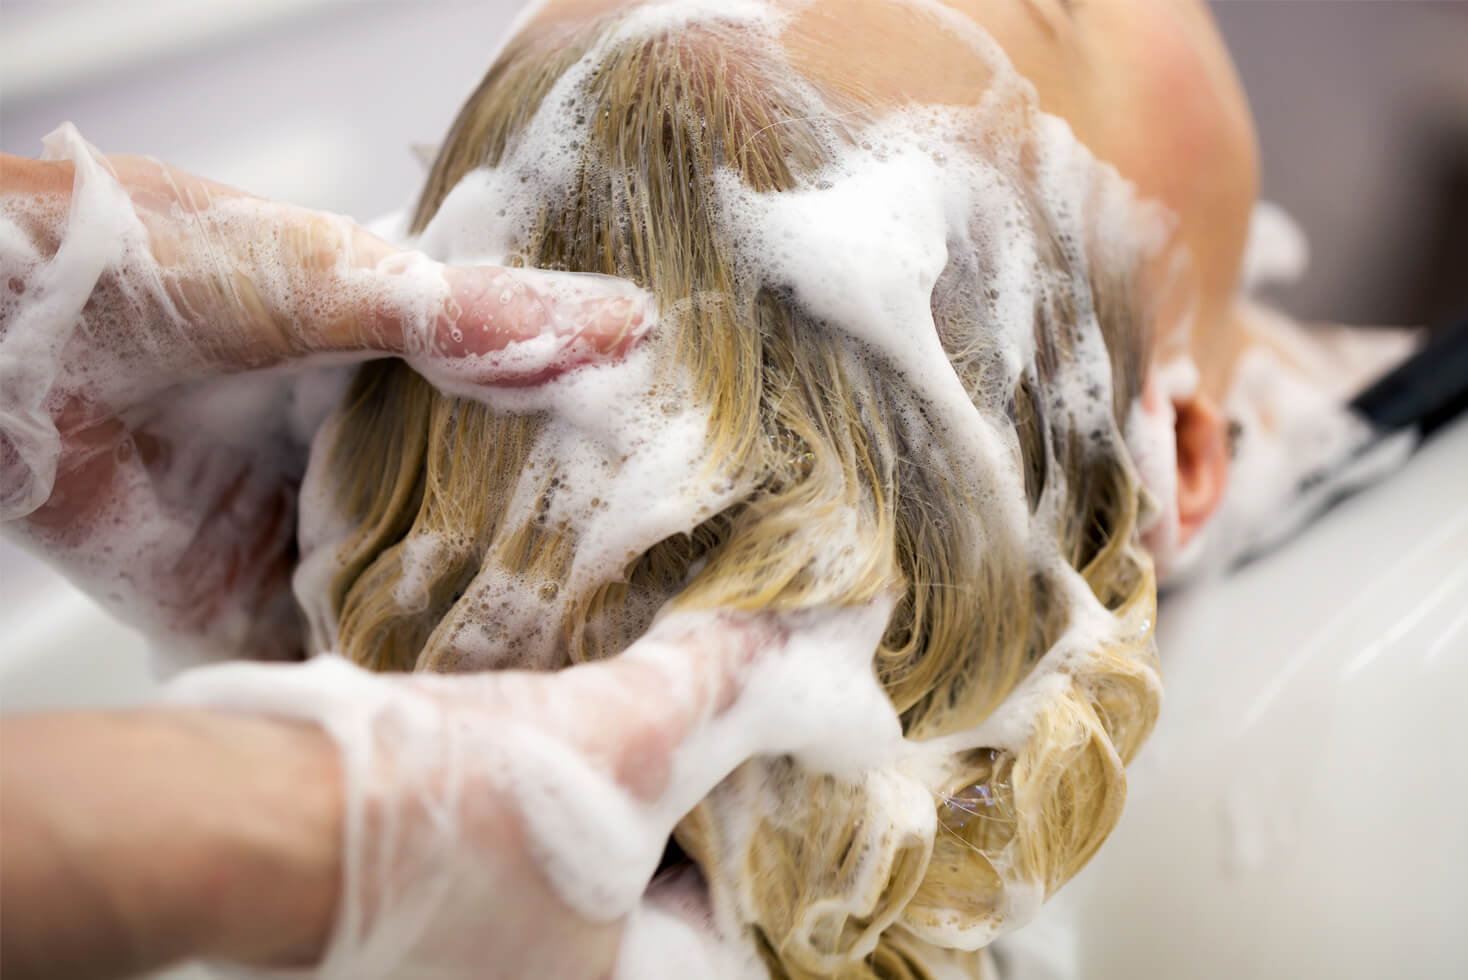 What Does Clarifying Shampoo Do to Bleached Hair?